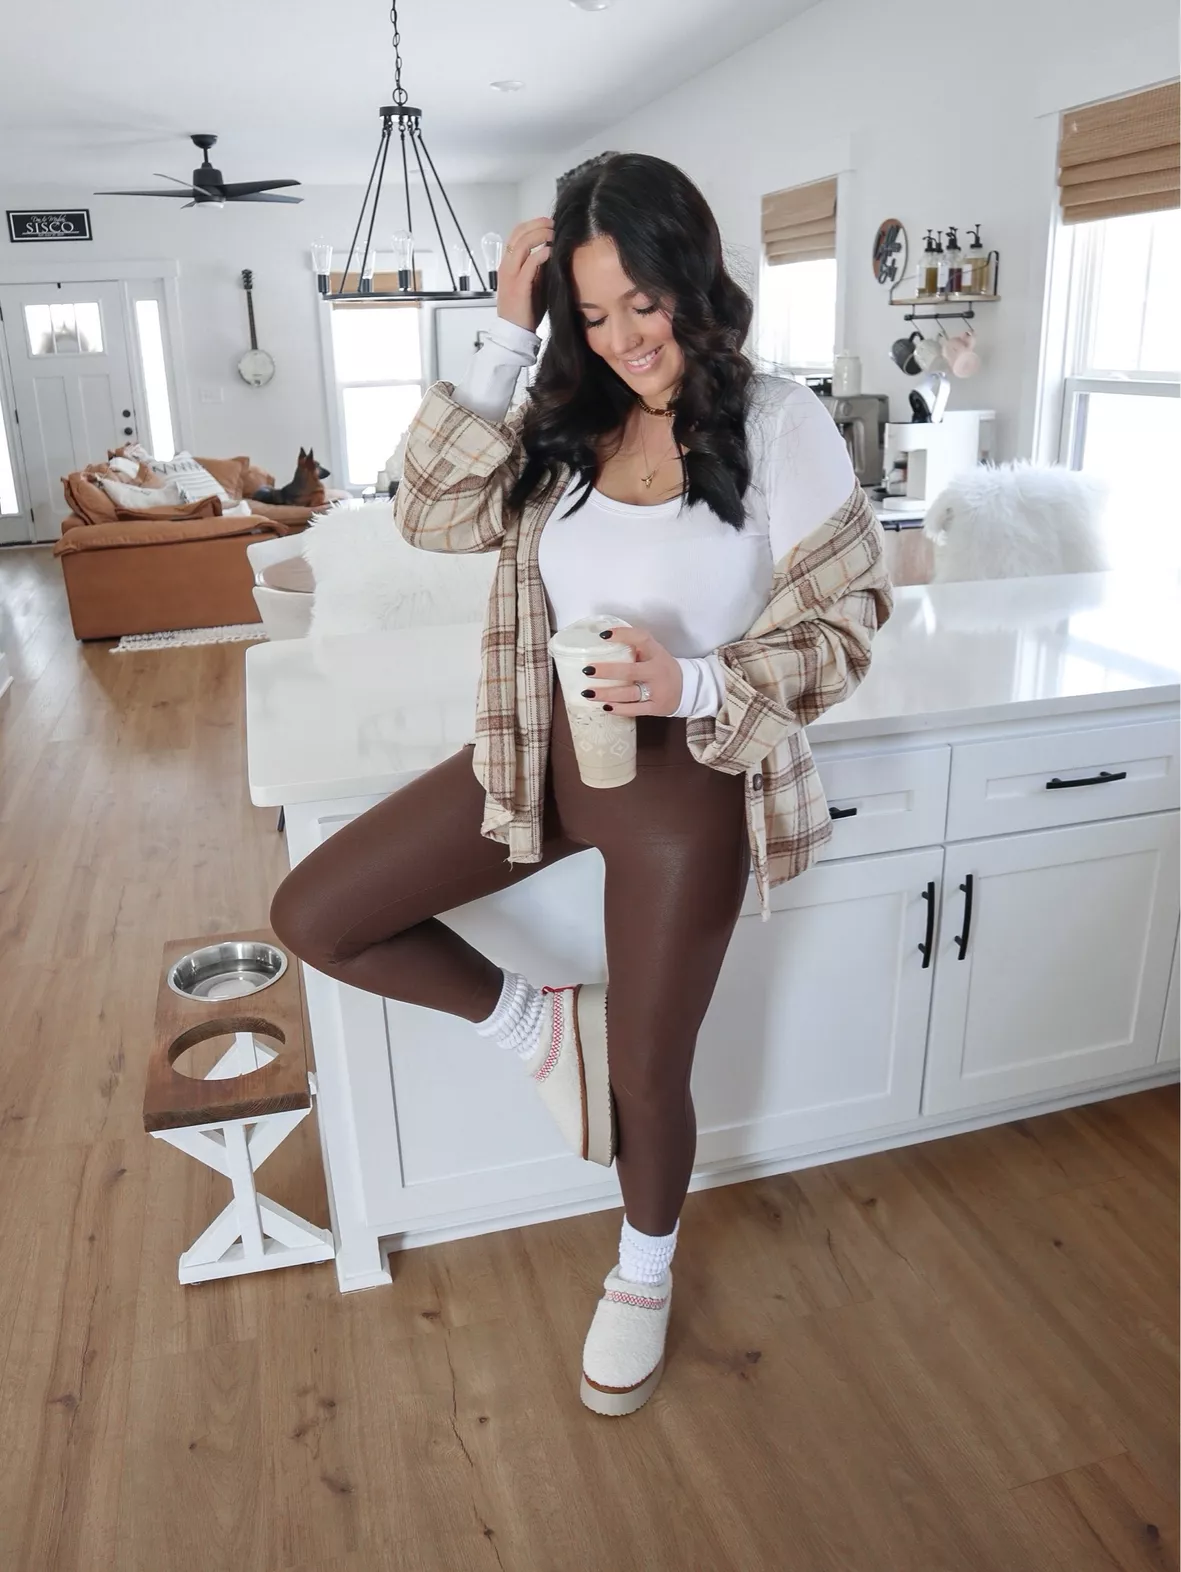 Casual Winter Outfits with Tights